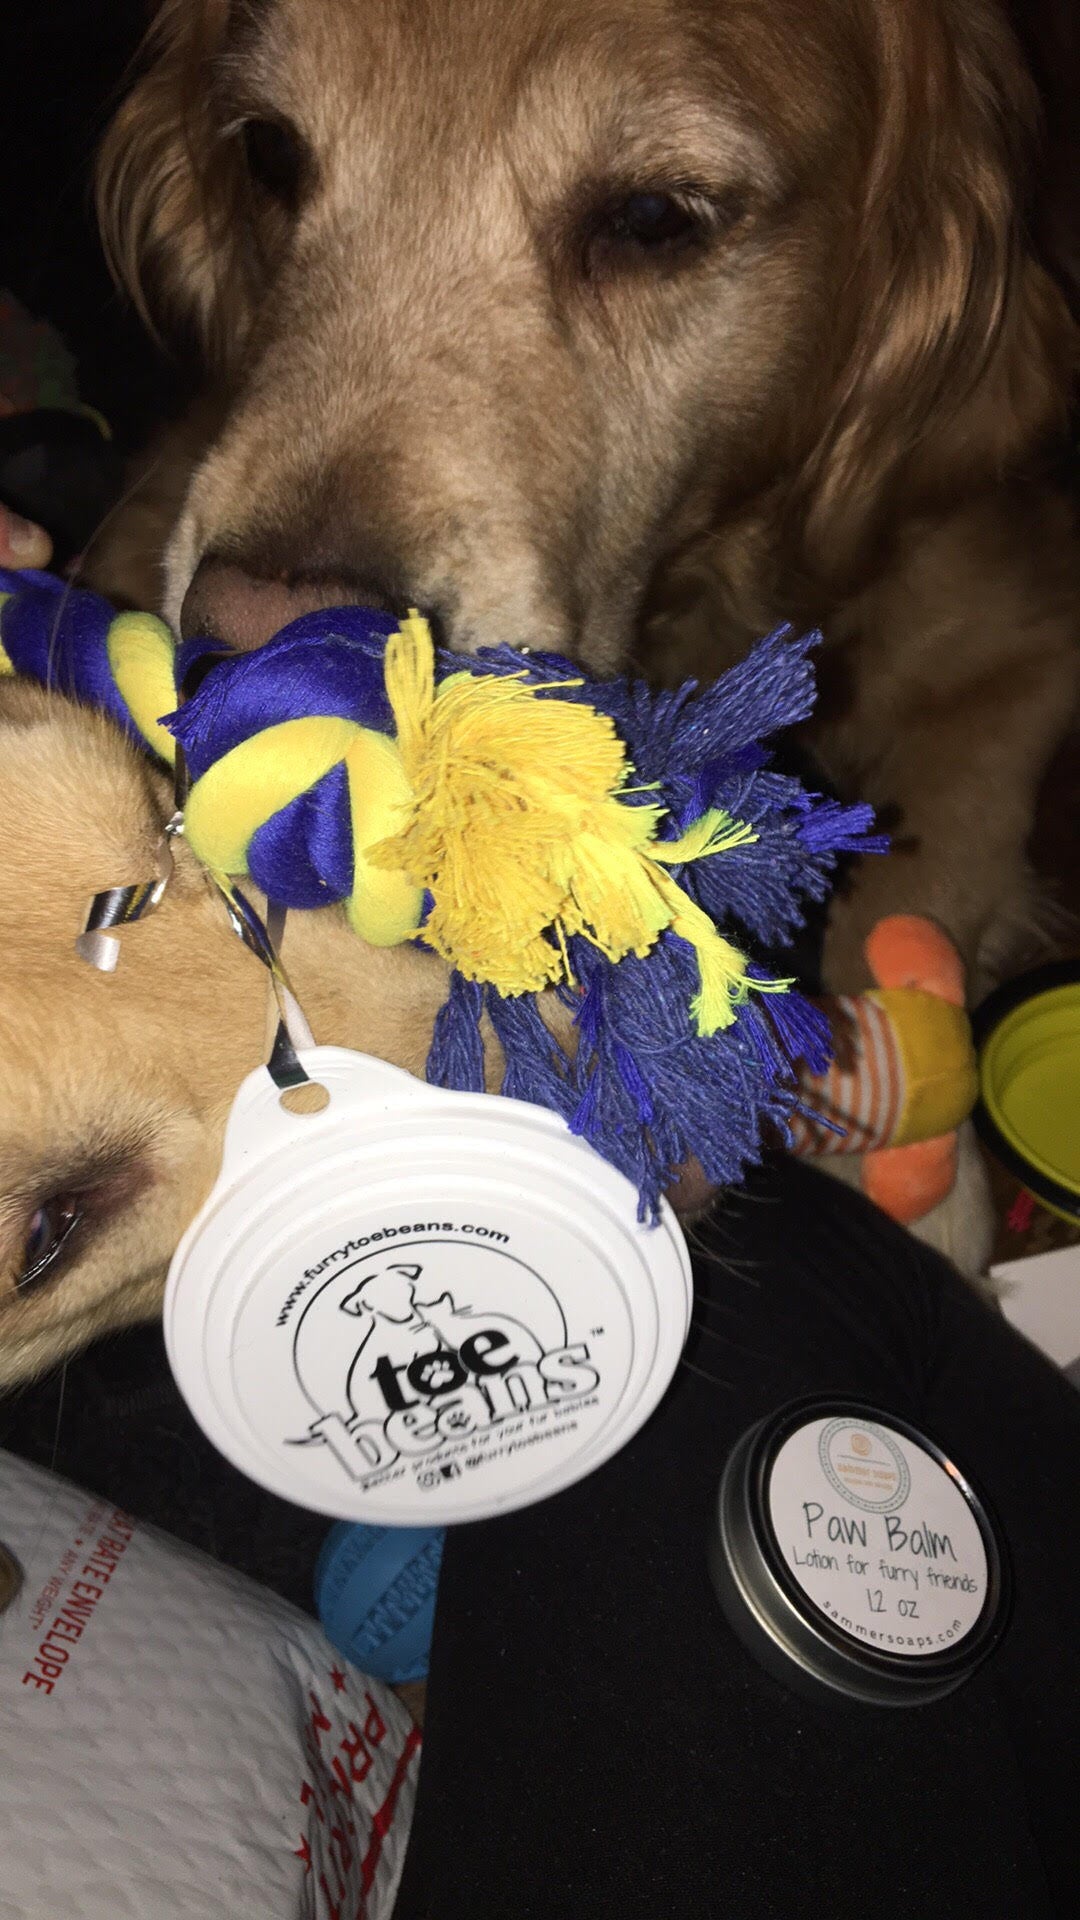 WINNER - Mandy's pup with prizes from toe beans